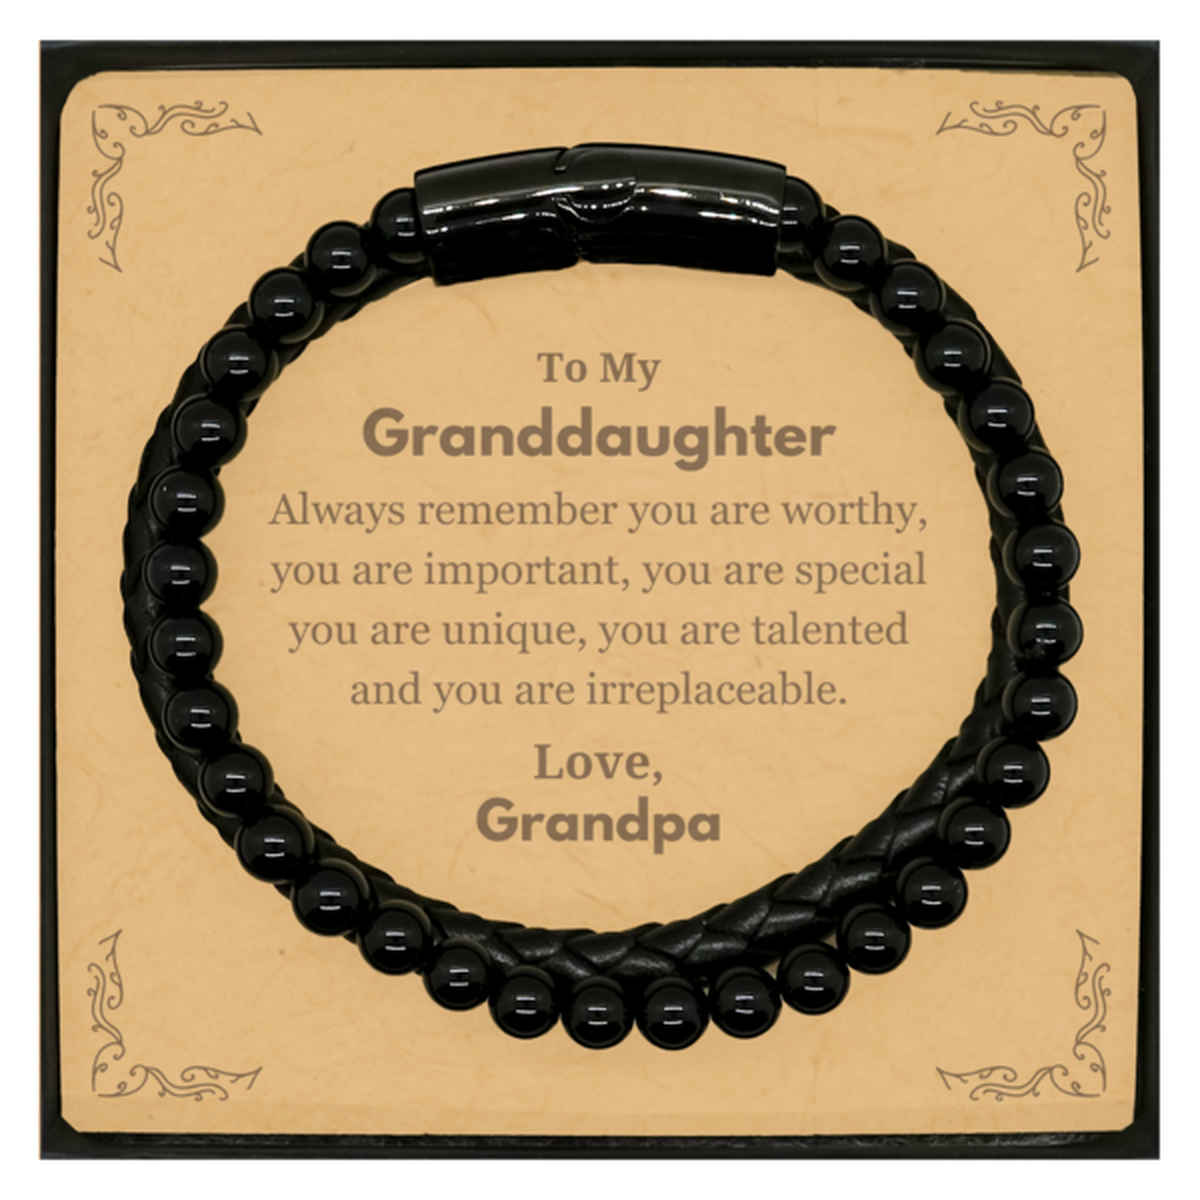 Granddaughter Birthday Gifts from Grandpa, Inspirational Stone Leather Bracelets for Granddaughter Christmas Graduation Gifts for Granddaughter Always remember you are worthy, you are important. Love, Grandpa